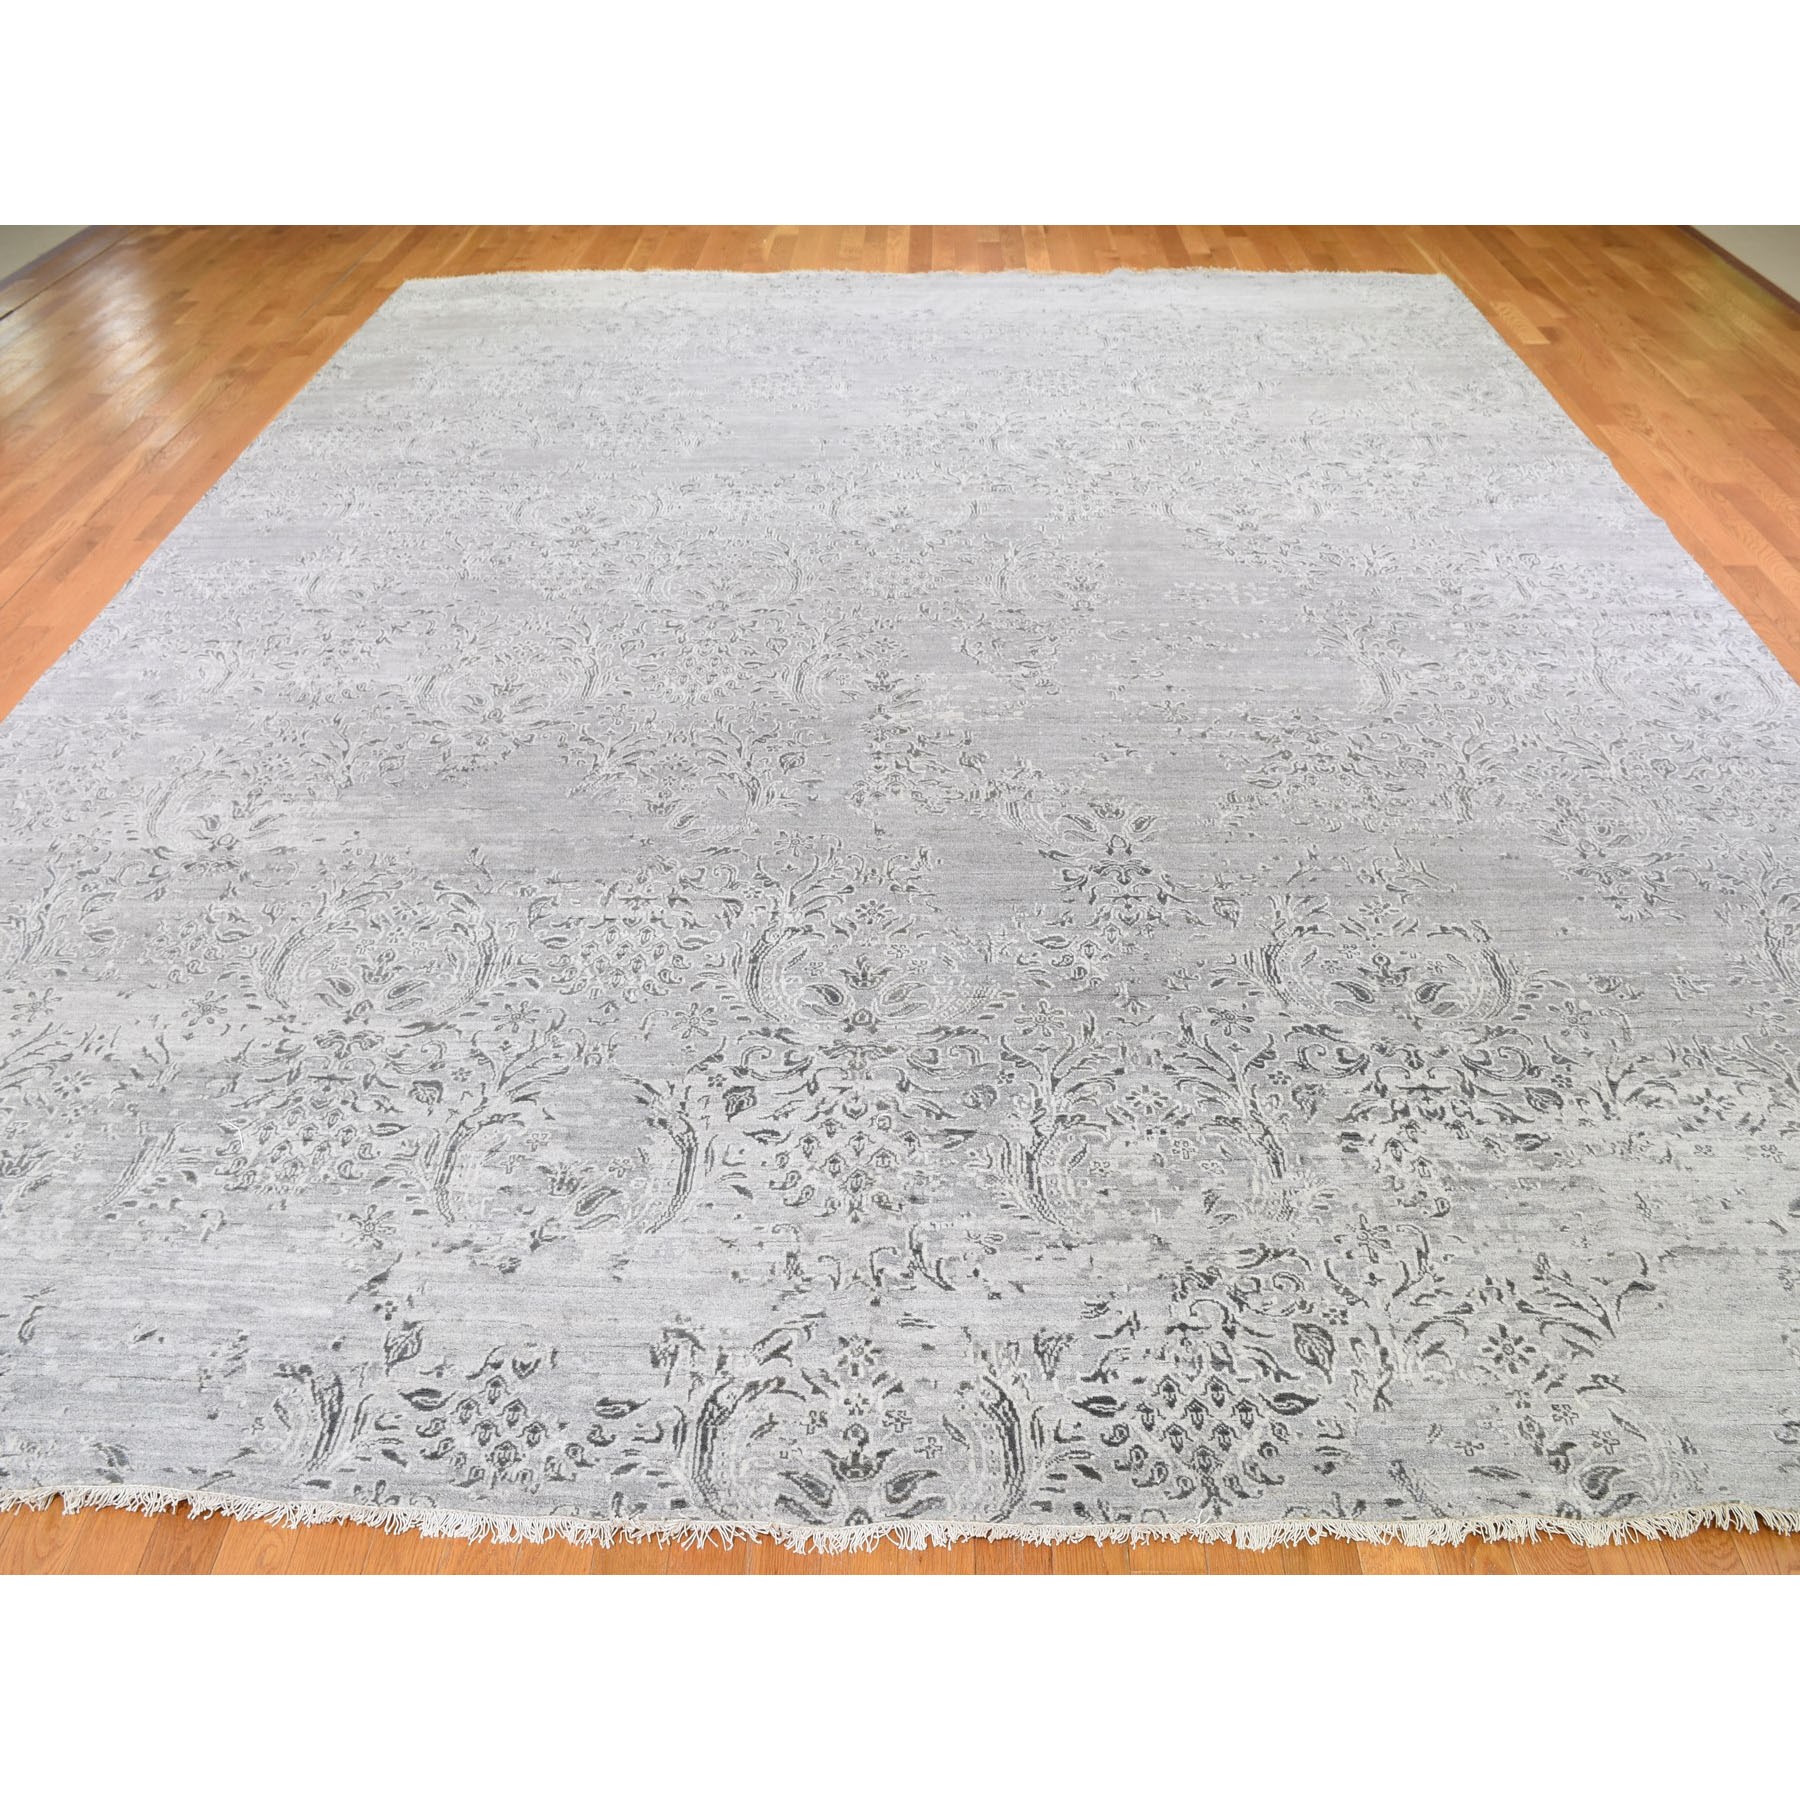 11-9 x14-10  Oversize Gray Damask Tone On Tone Wool and Silk Hand-Knotted Oriental Rug 